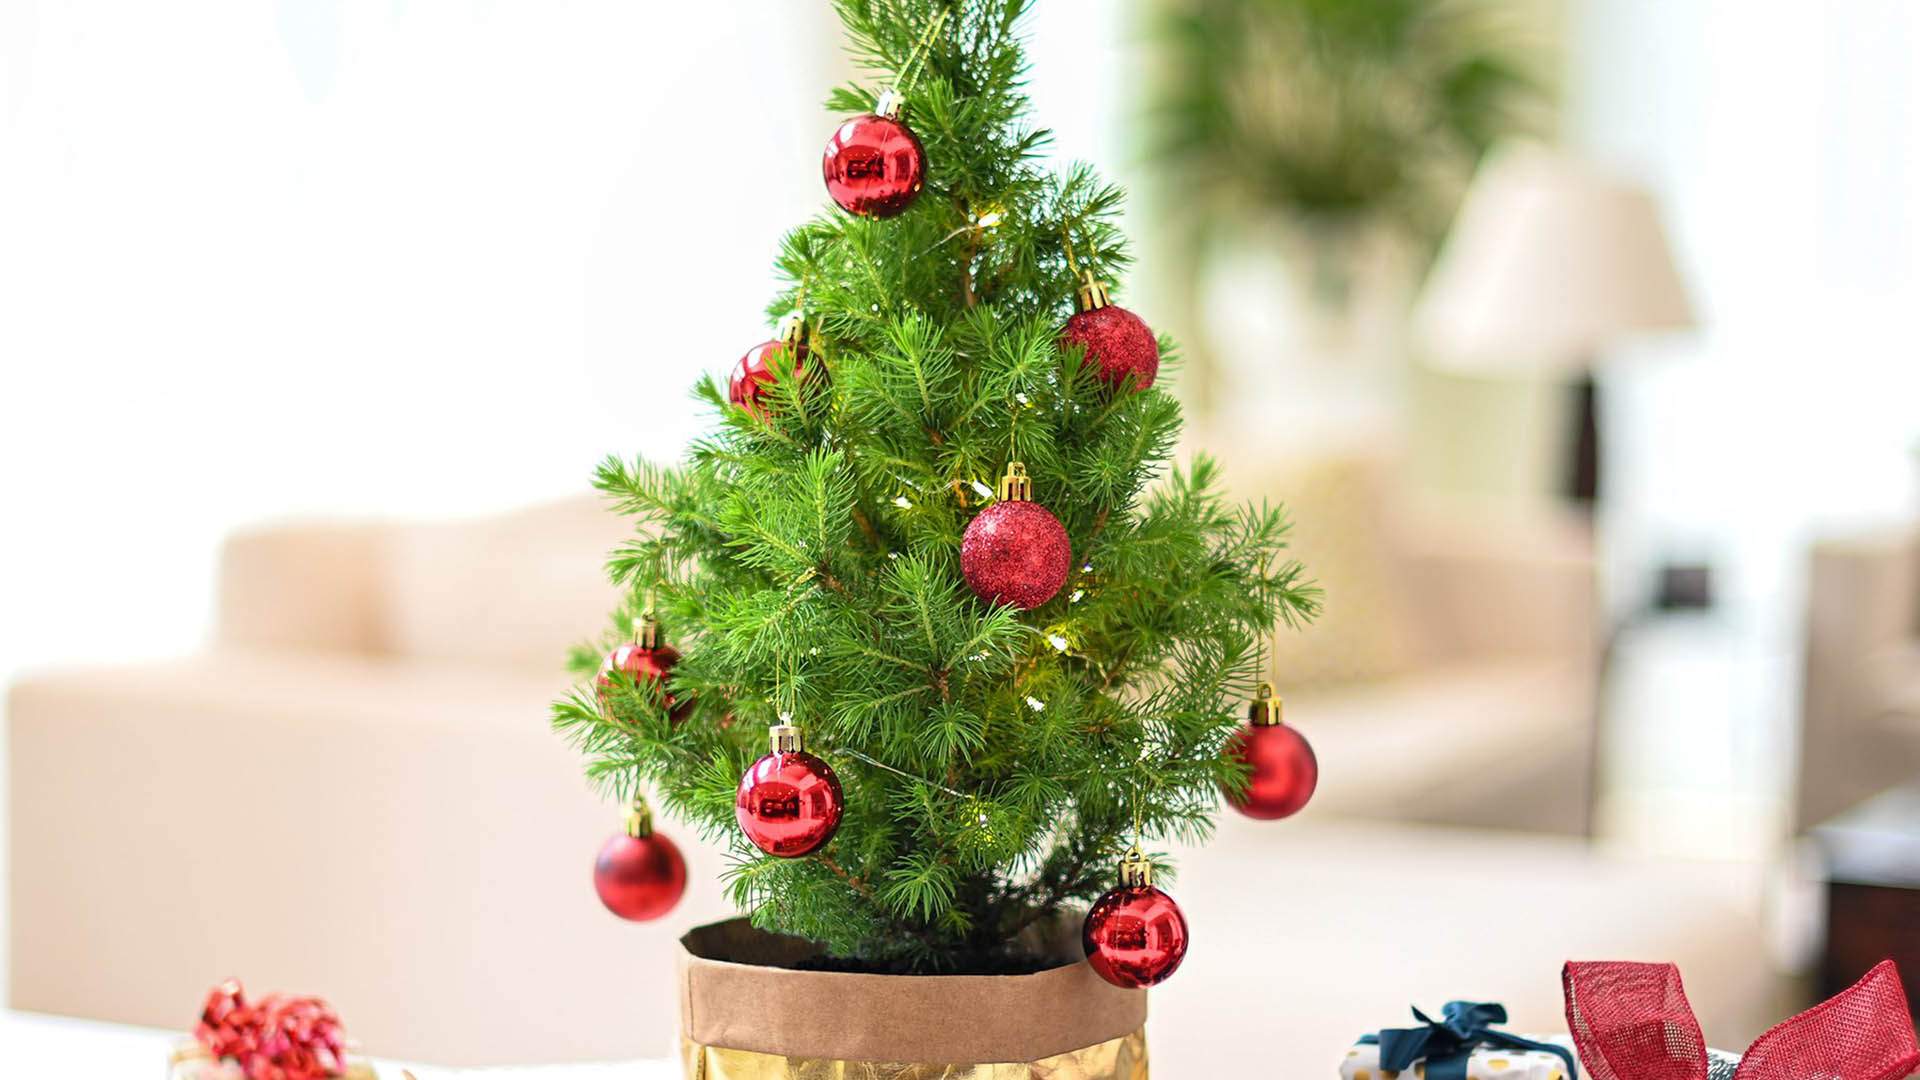 Floraly Is Delivering Its Tiny Living Christmas Trees to Your Door This Festive Season